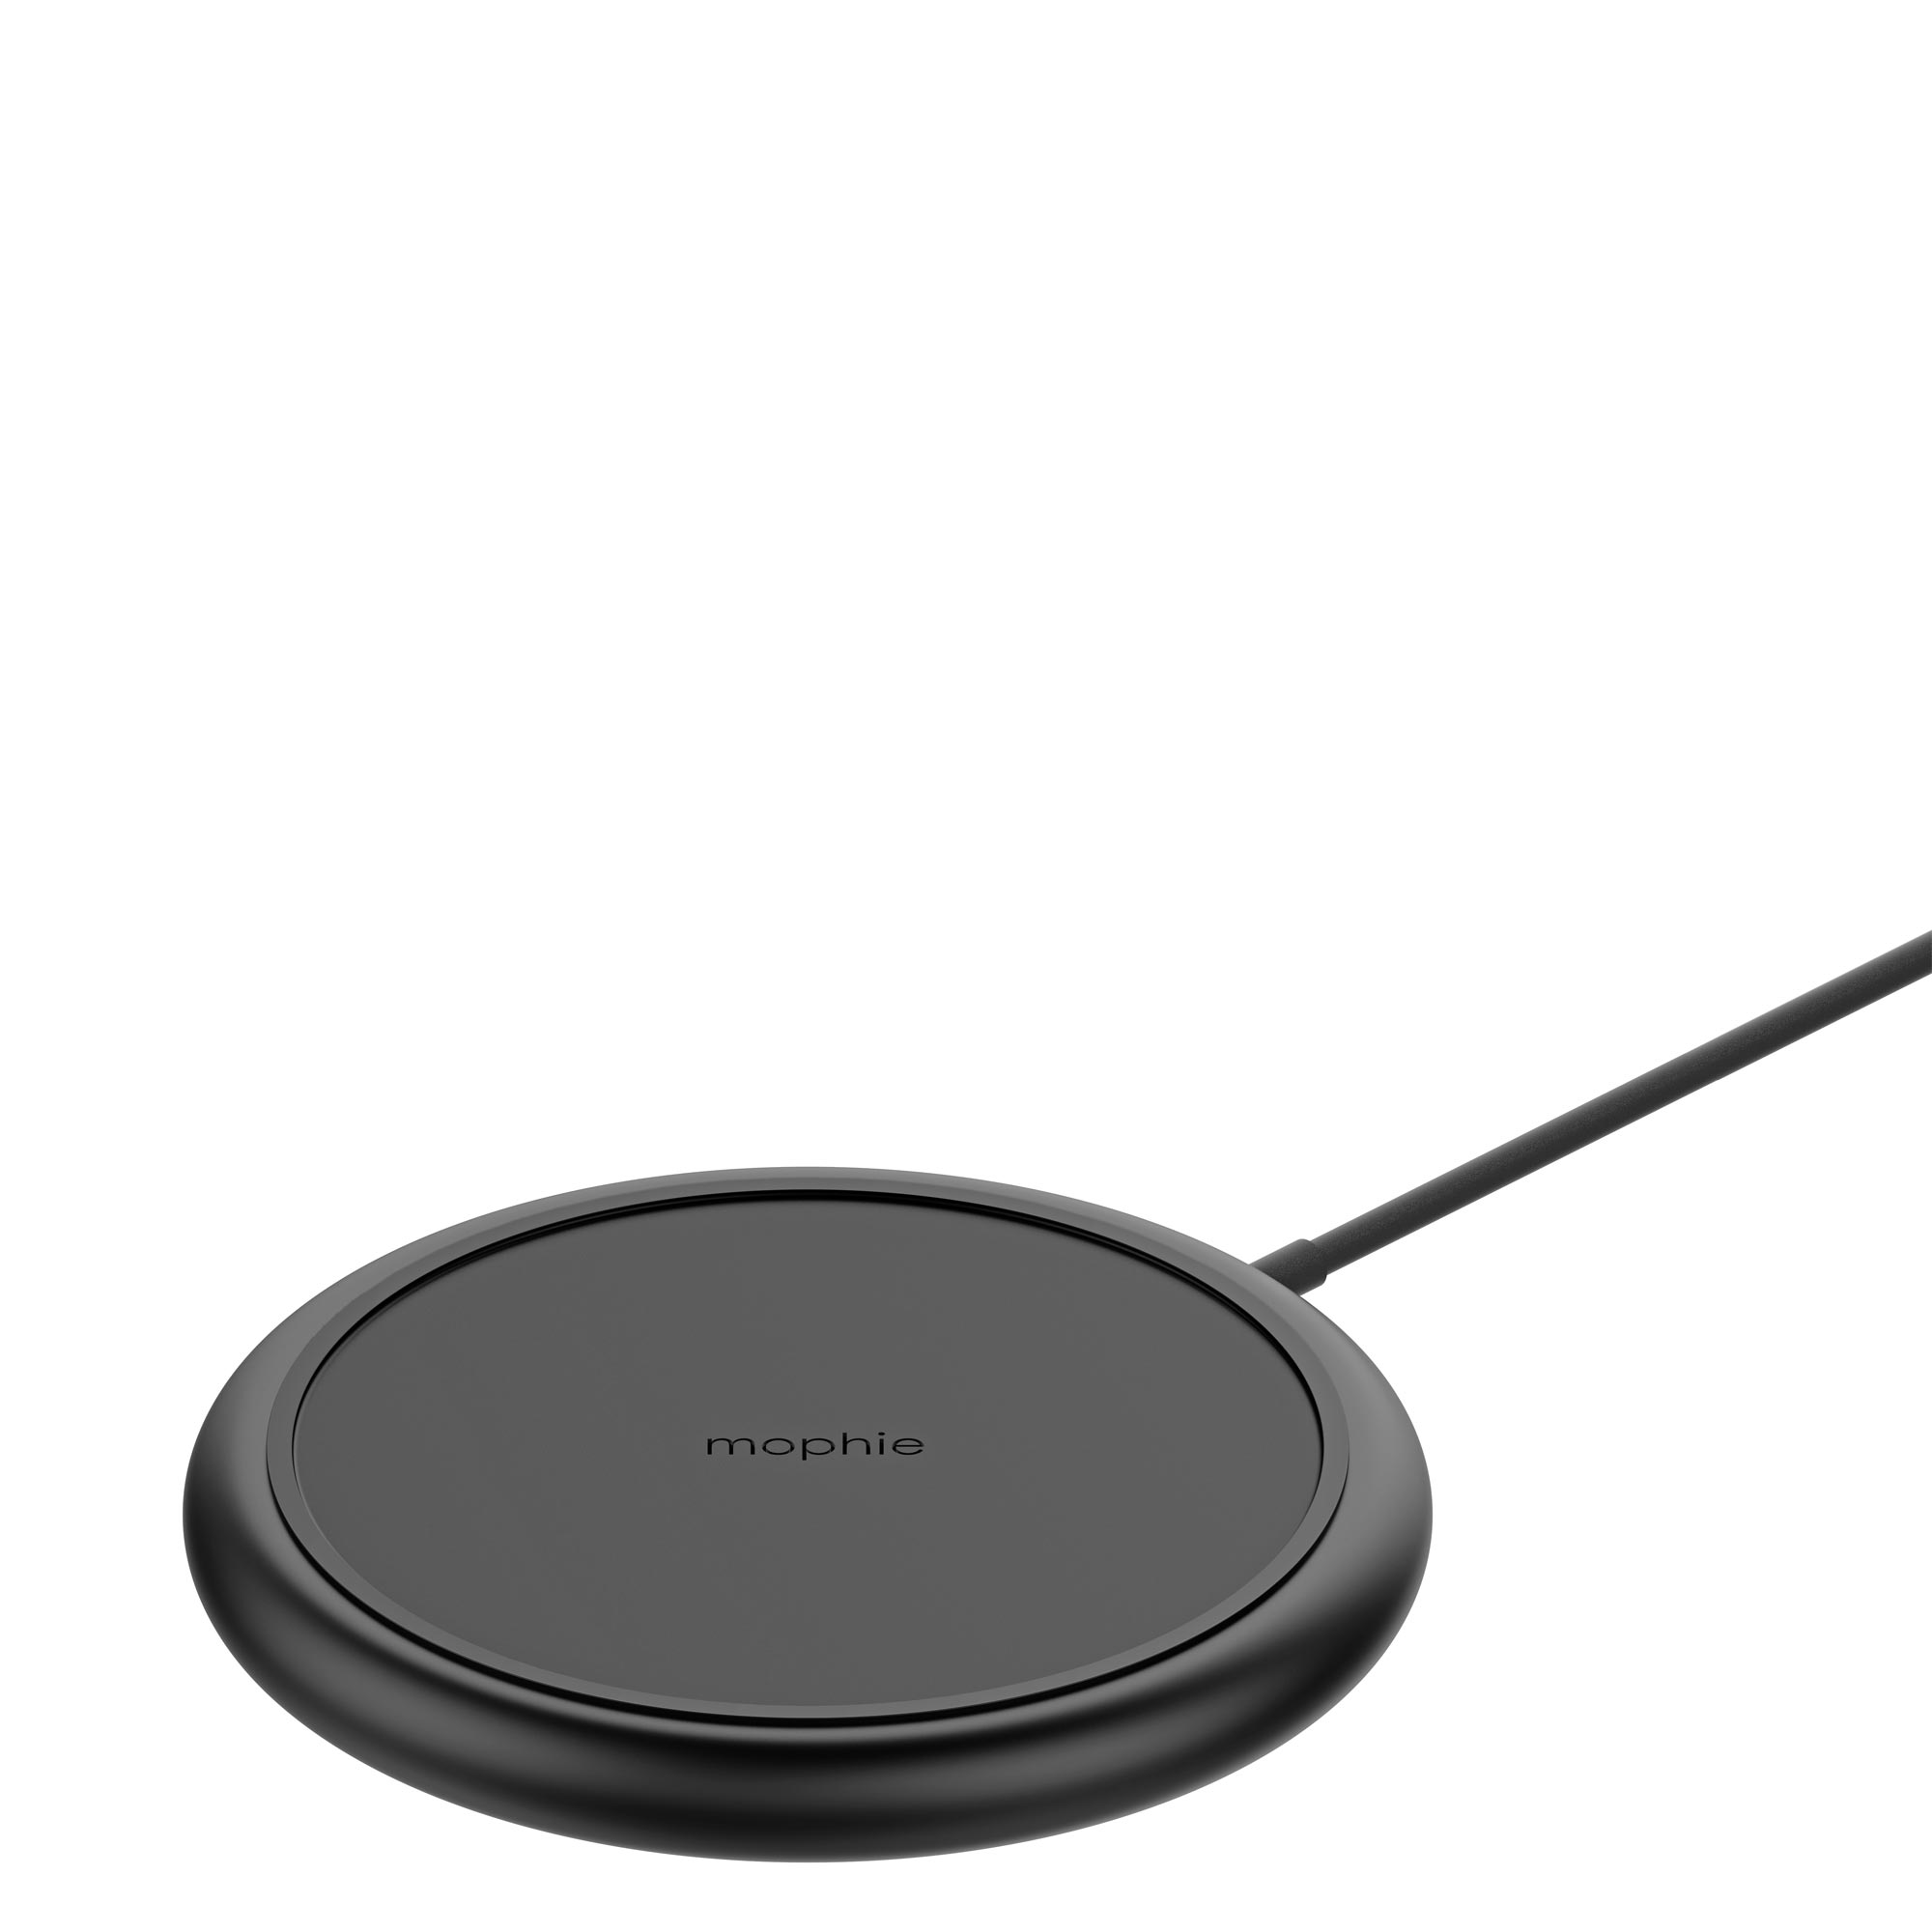 The mophie Charge Stream Pad+ universal wireless charging pad